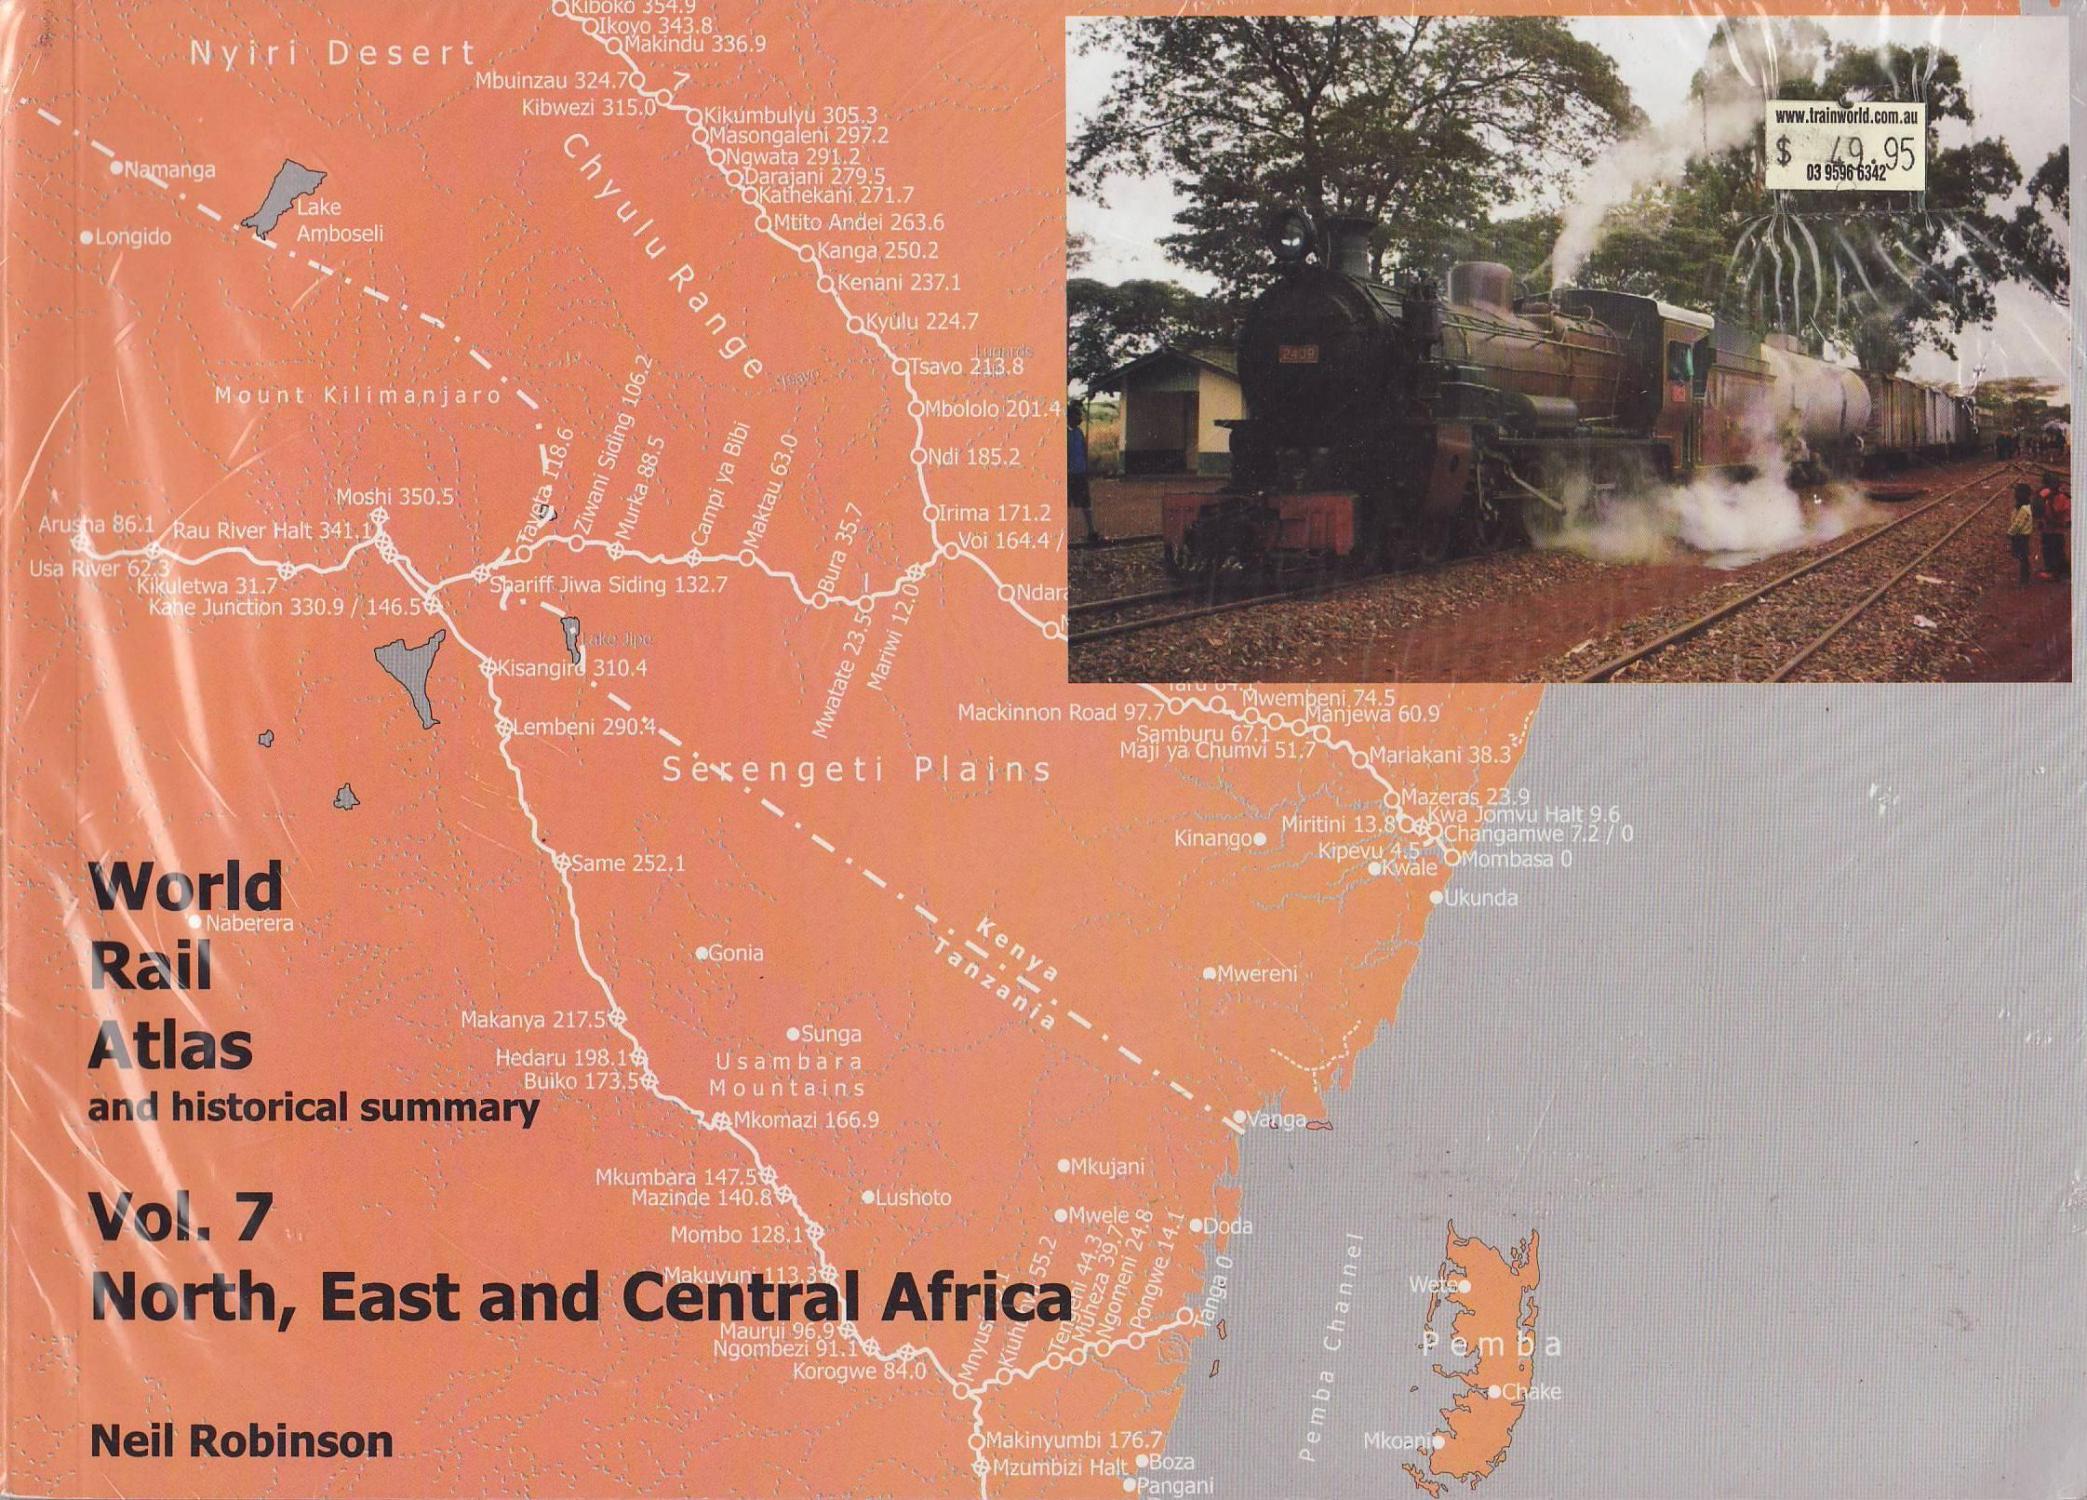 World Rail Atlas and Historical Summary Volume 7 : North, East and Central Africa